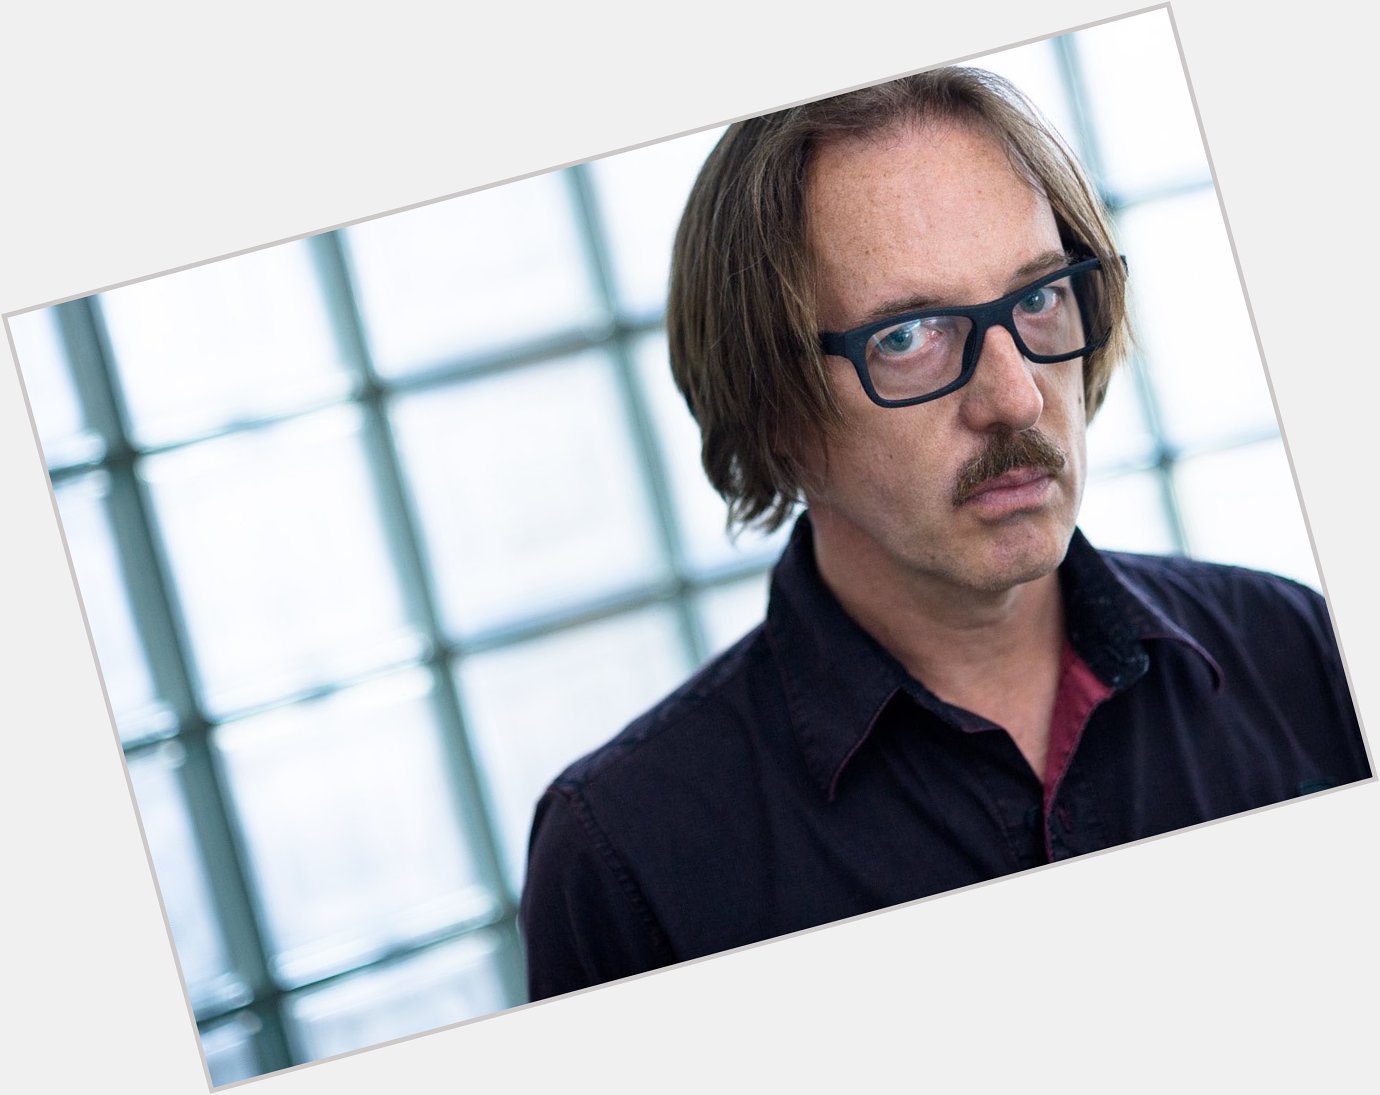  Happy Birthday to the greatest drummer of all time. Butch Vig. 